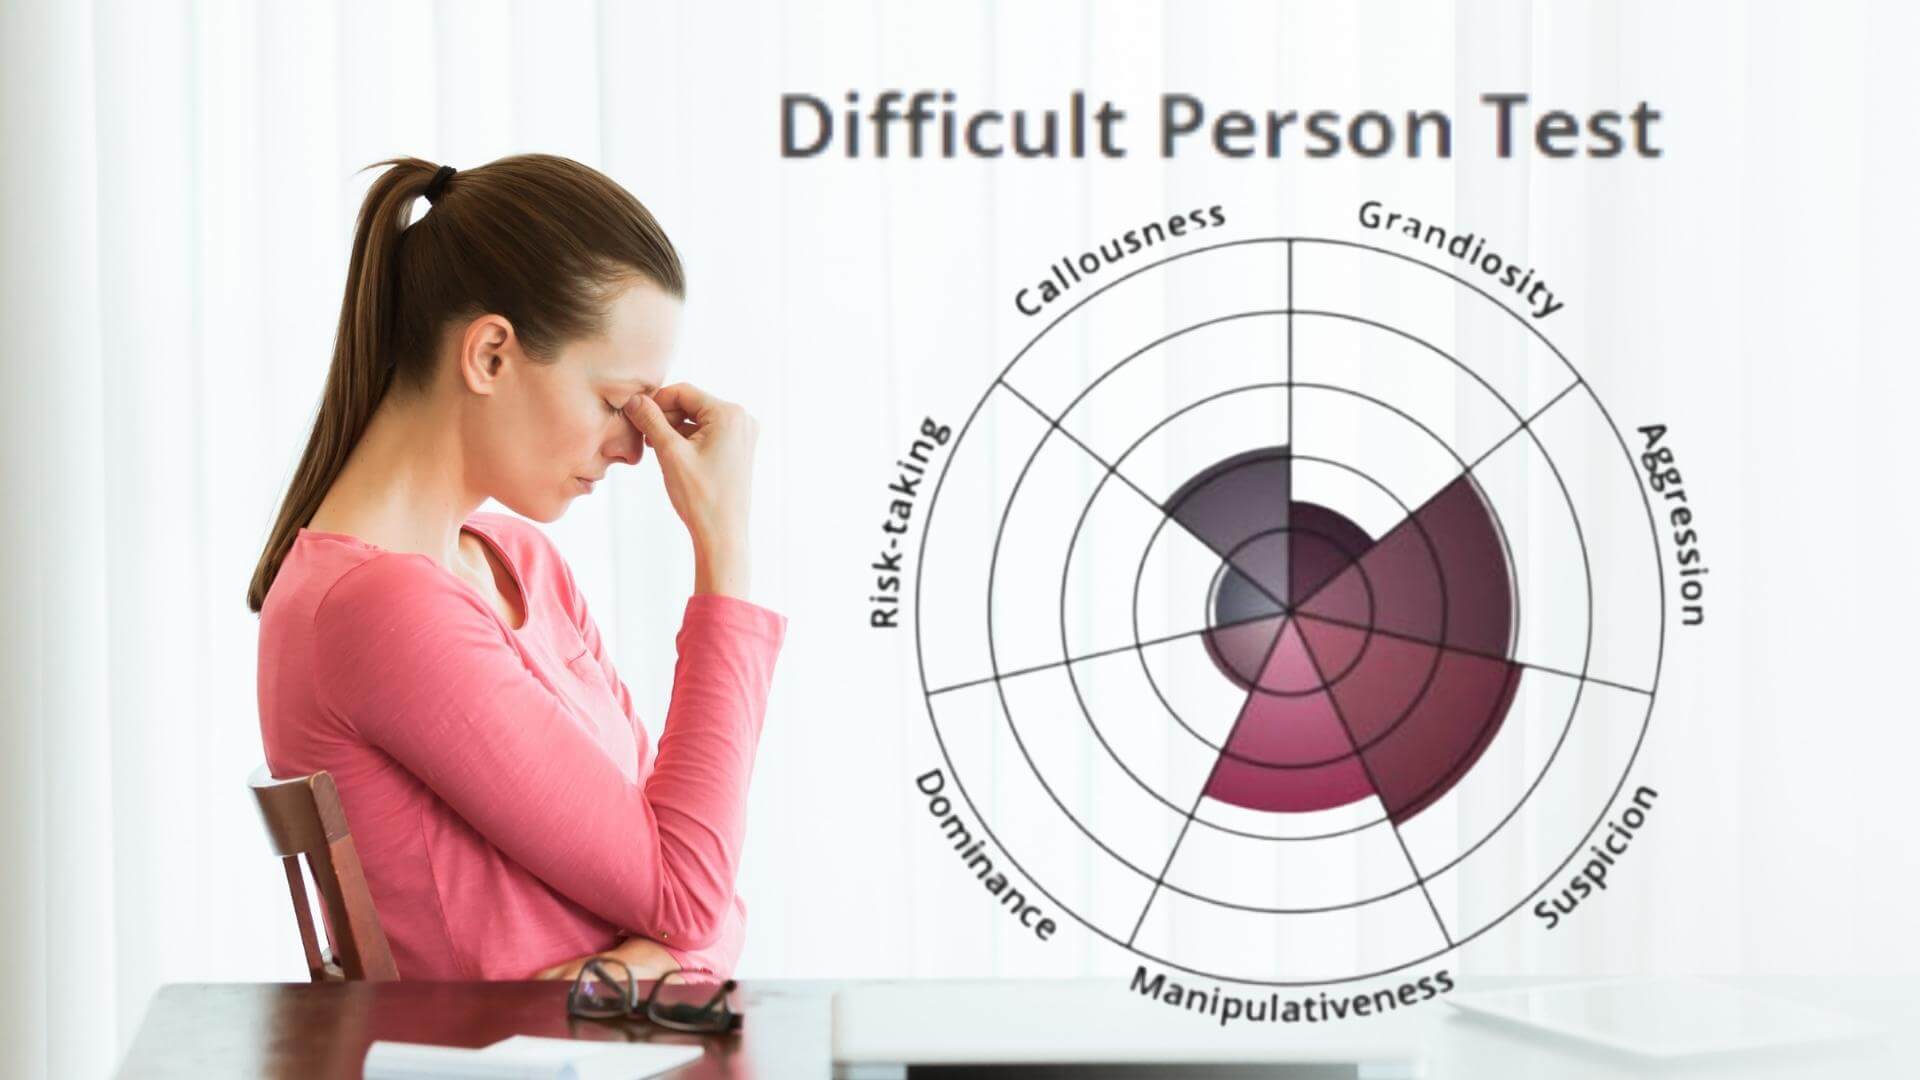 What Is Difficult Person Test?